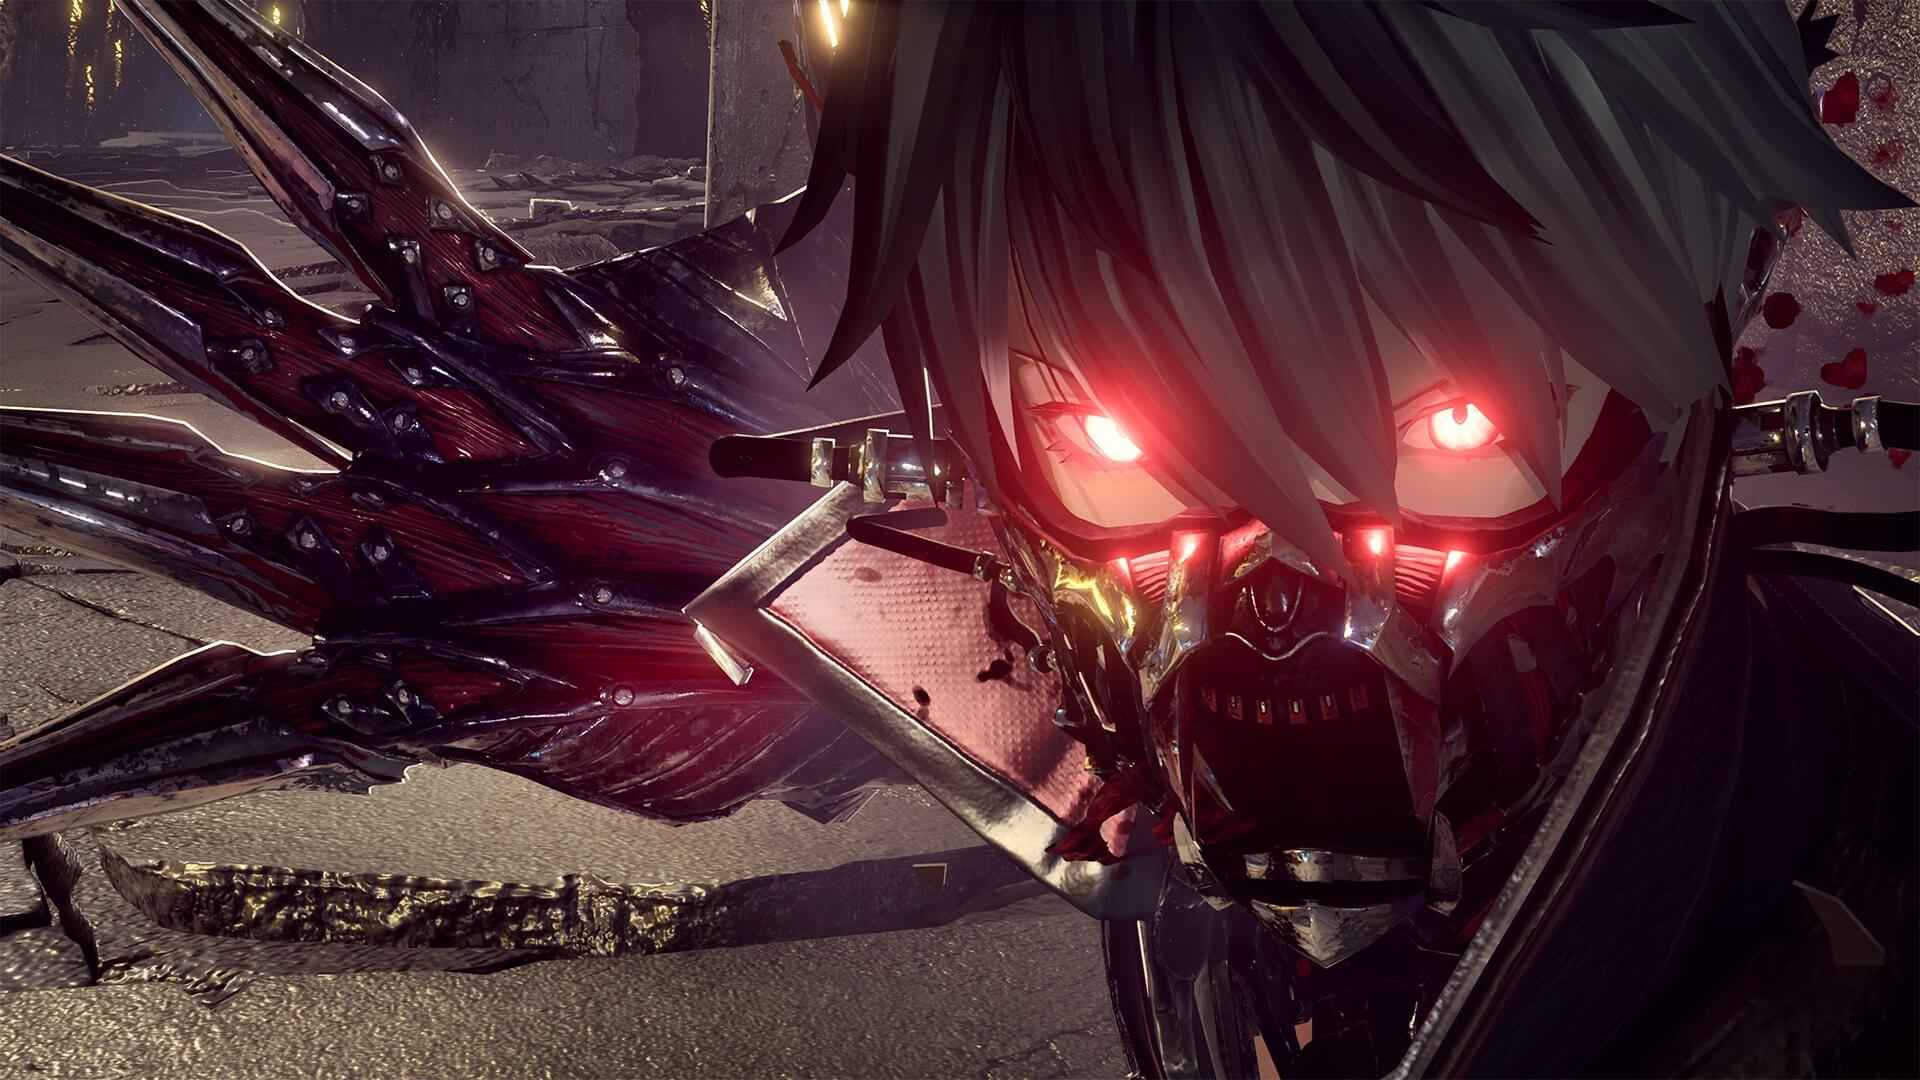 Code Vein Update 1.50 Adds New Photo Mode Features, Full Patch Notes Inside